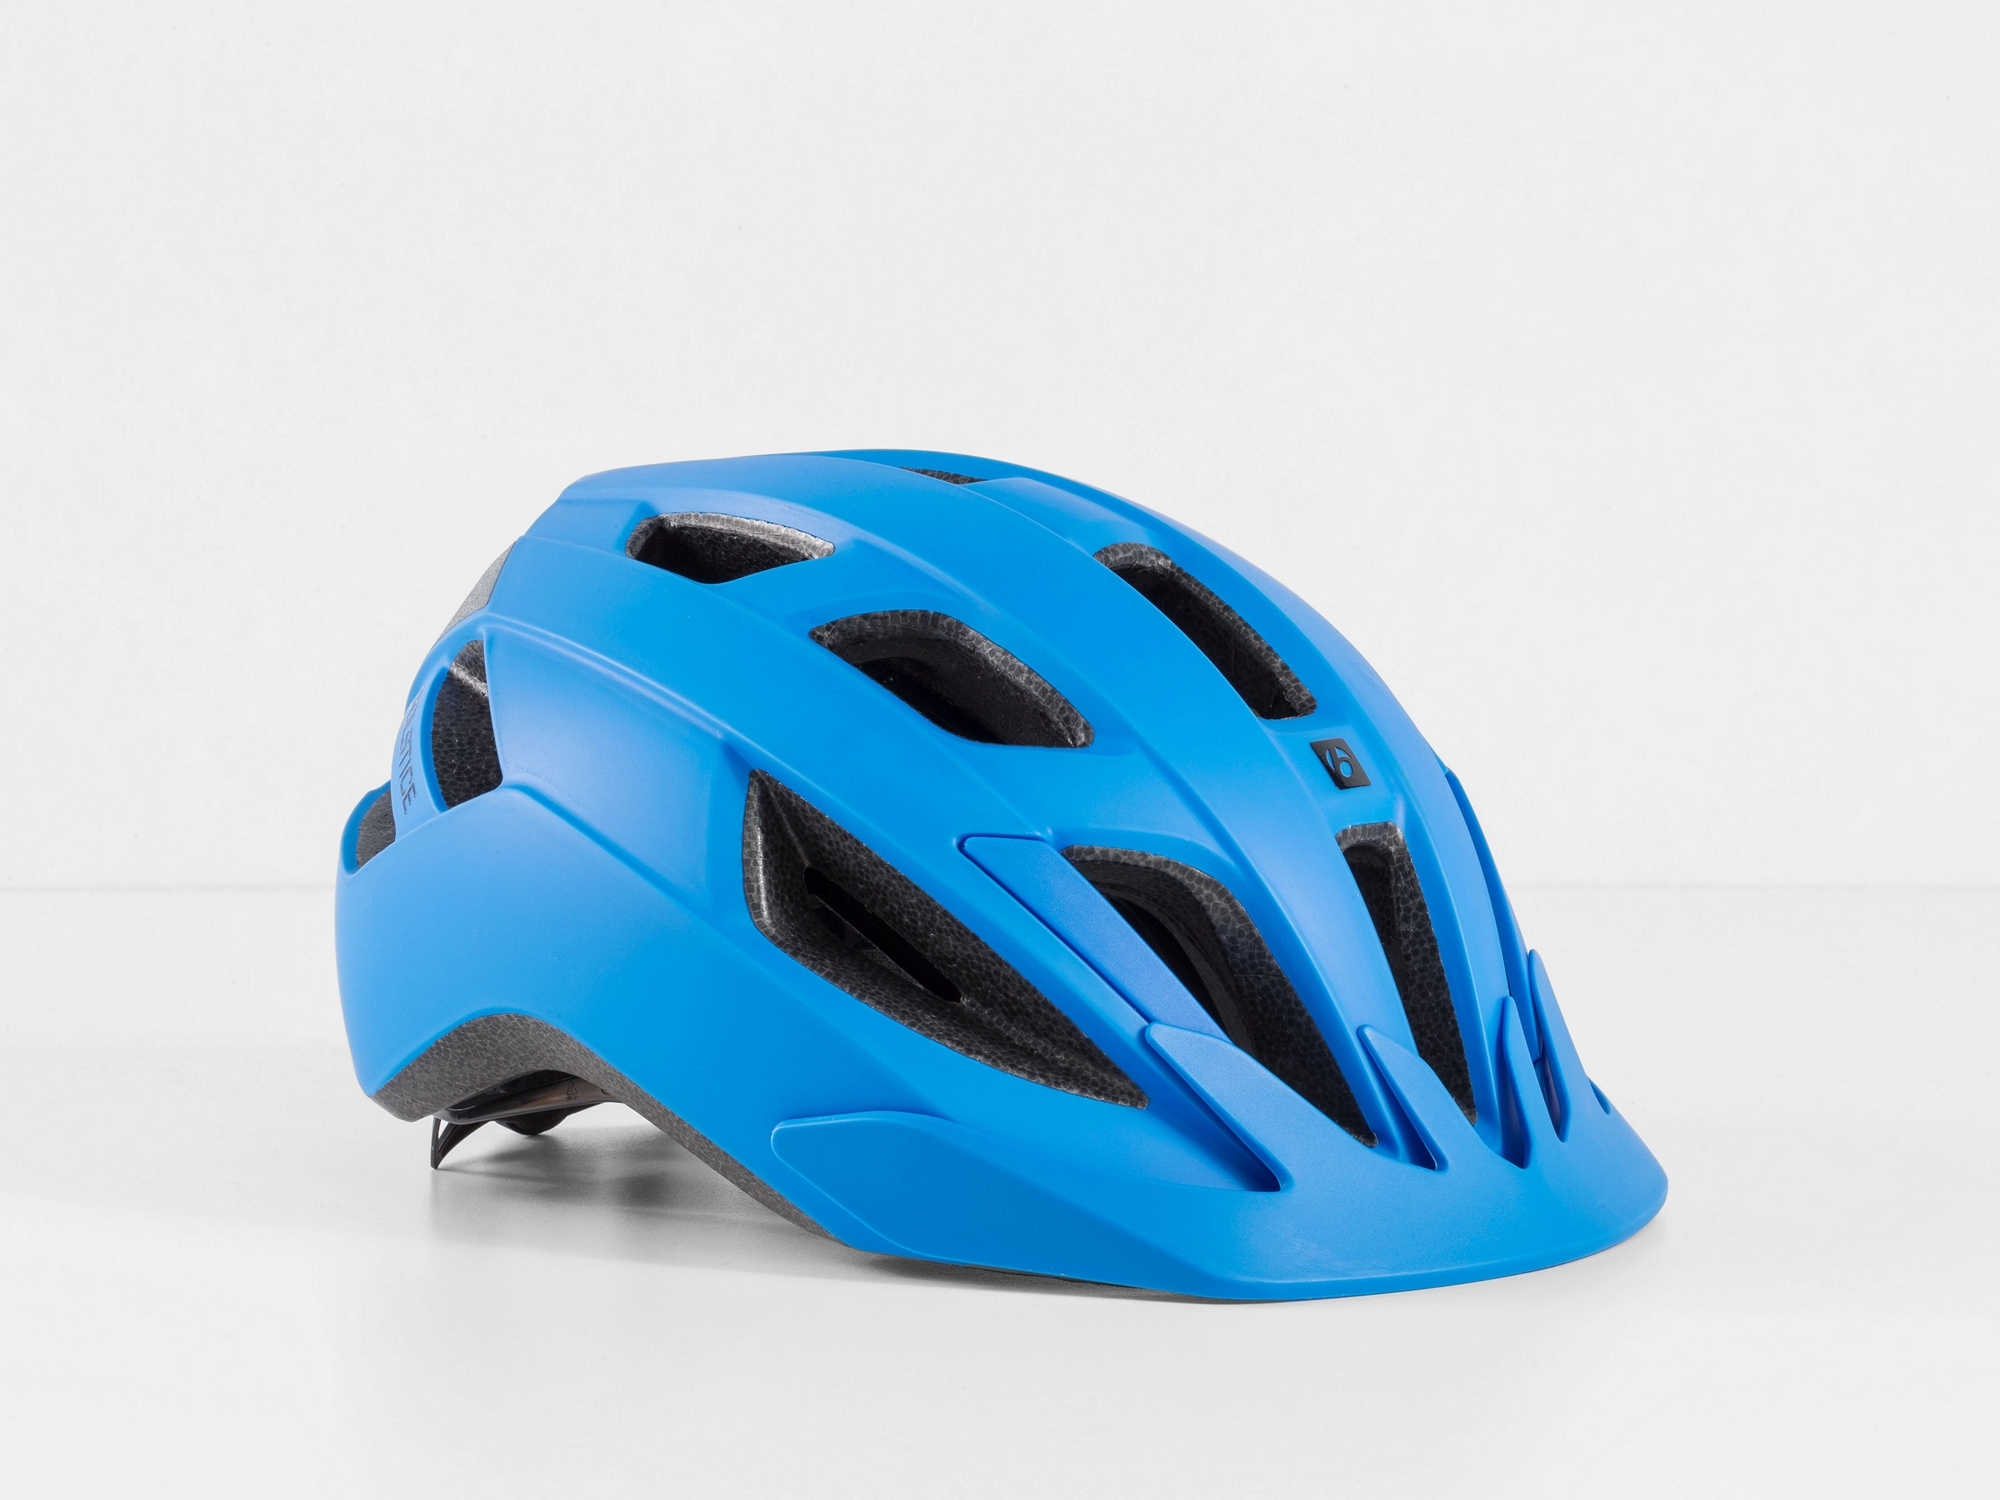 <a href="https://cycles-clement.be/product/bont-casque-solstice-mips-medium-large-waterloo/">BONT CASQUE SOLSTICE MIPS MEDIUM/LARGE WATERLOO</a>